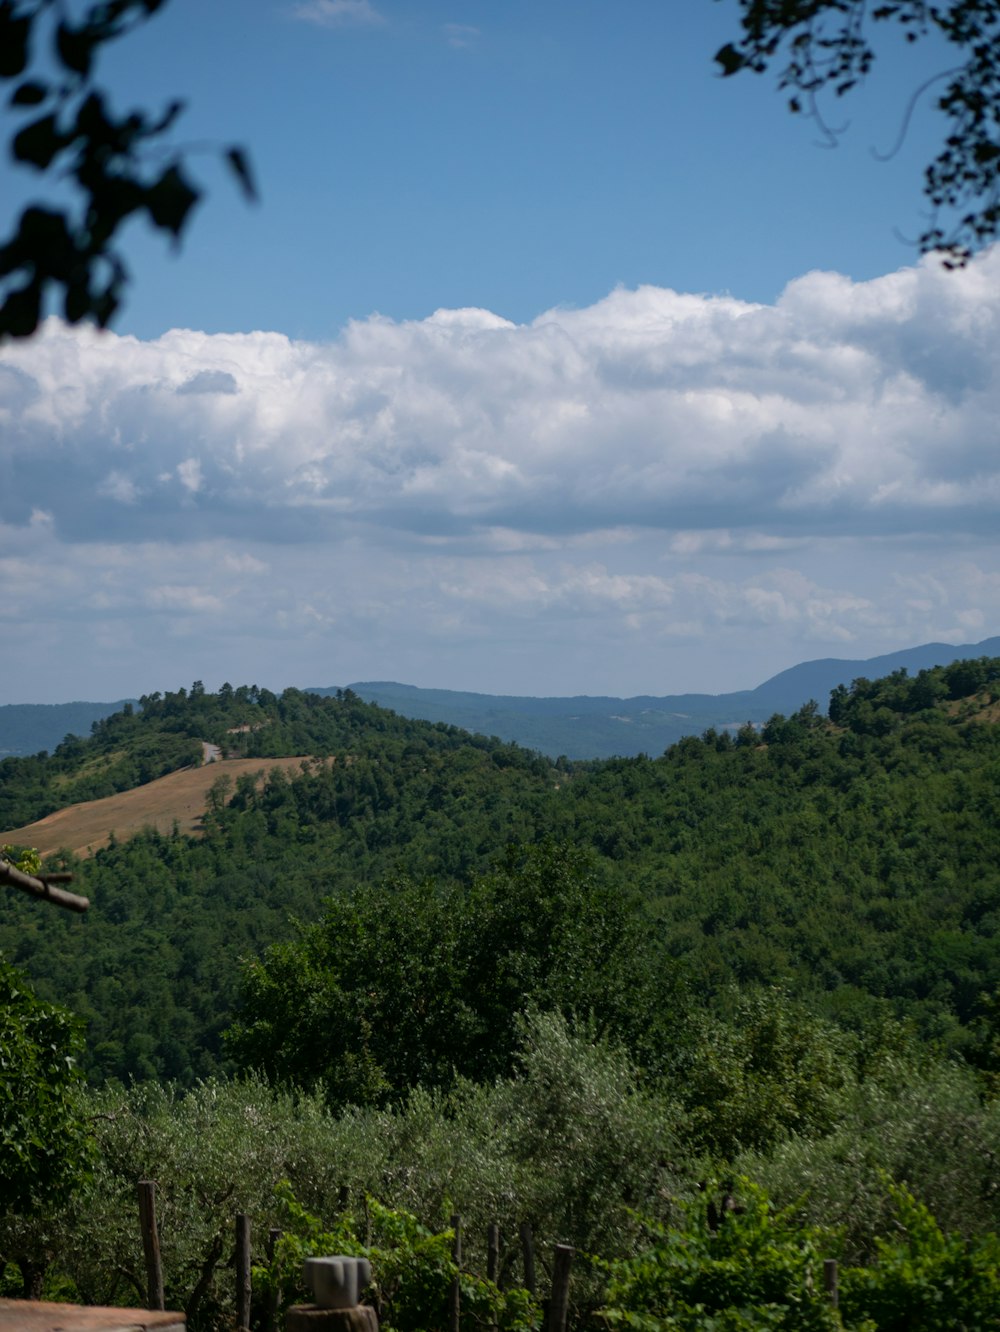 a landscape with trees and hills